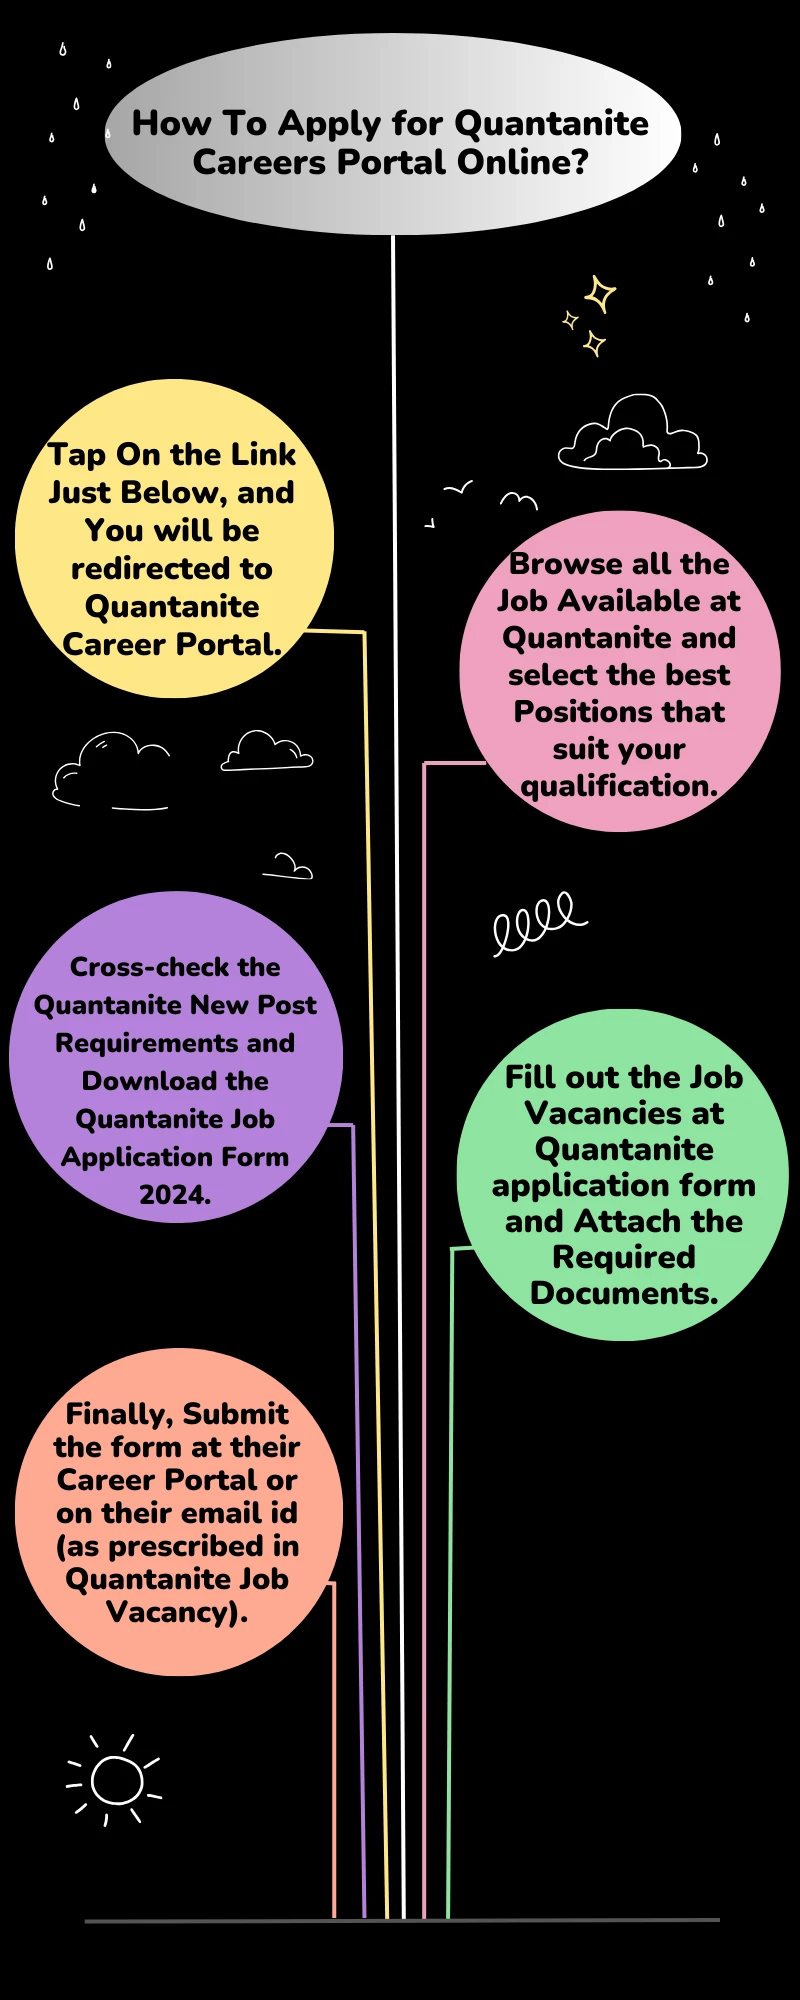 How To Apply for Quantanite Careers Portal Online? 